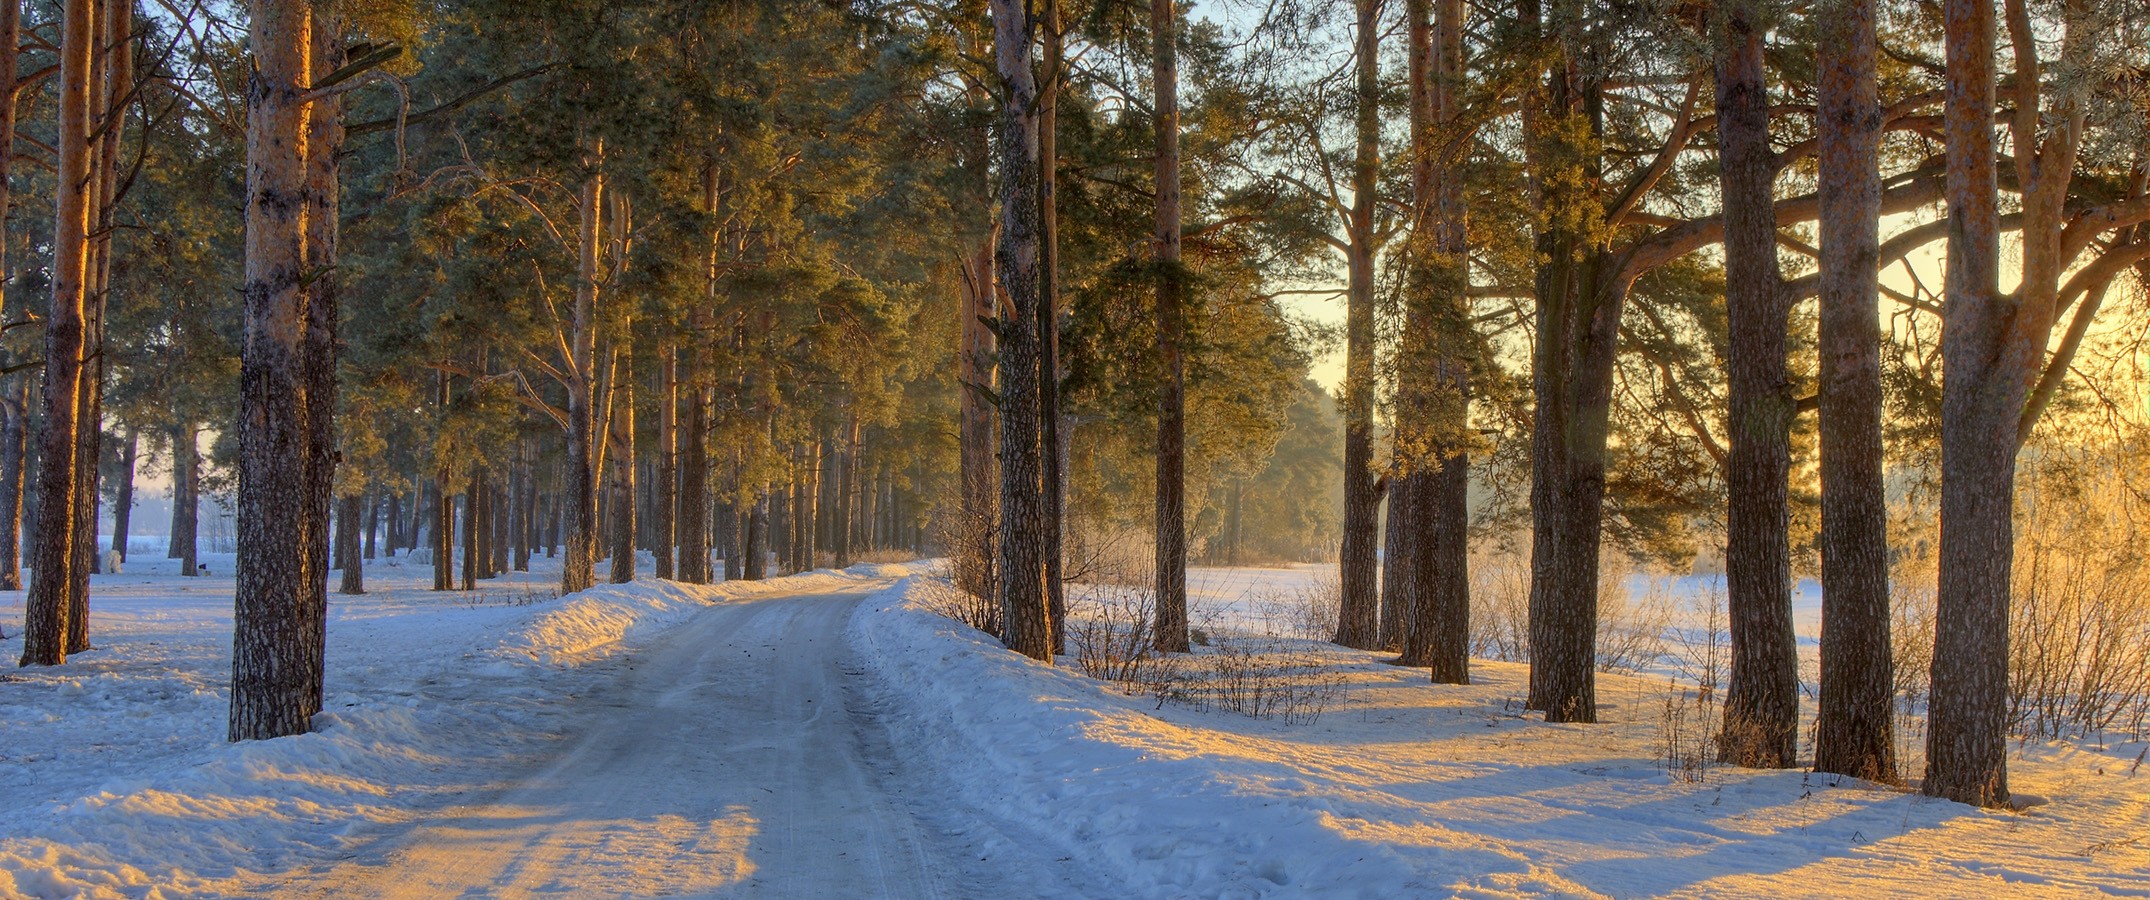 Nature Landscape Morning Sunlight Forest Road Winter Snow Panoramas Cold Trees Russia 2150x900